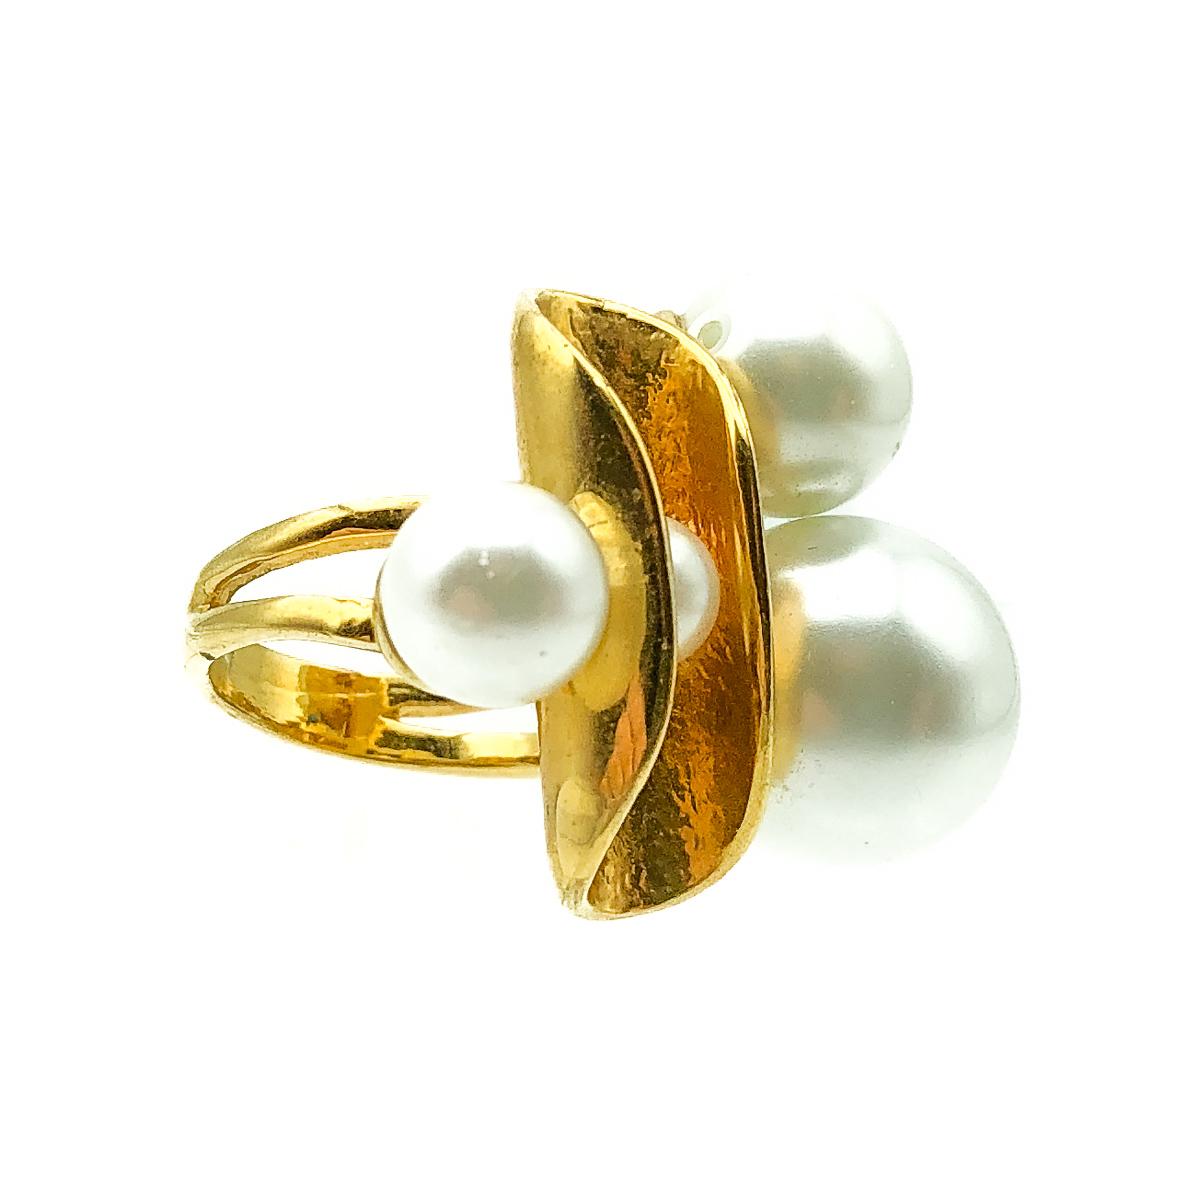 An exquisite Vintage Statement Pearl Ring dating to 1980s. Crafted in glass simulated pearl and gold plated metal. Featuring three lustrous simulated pearls of varying size settled around a fold of gold hued metal. The fourth pearl is clasped within